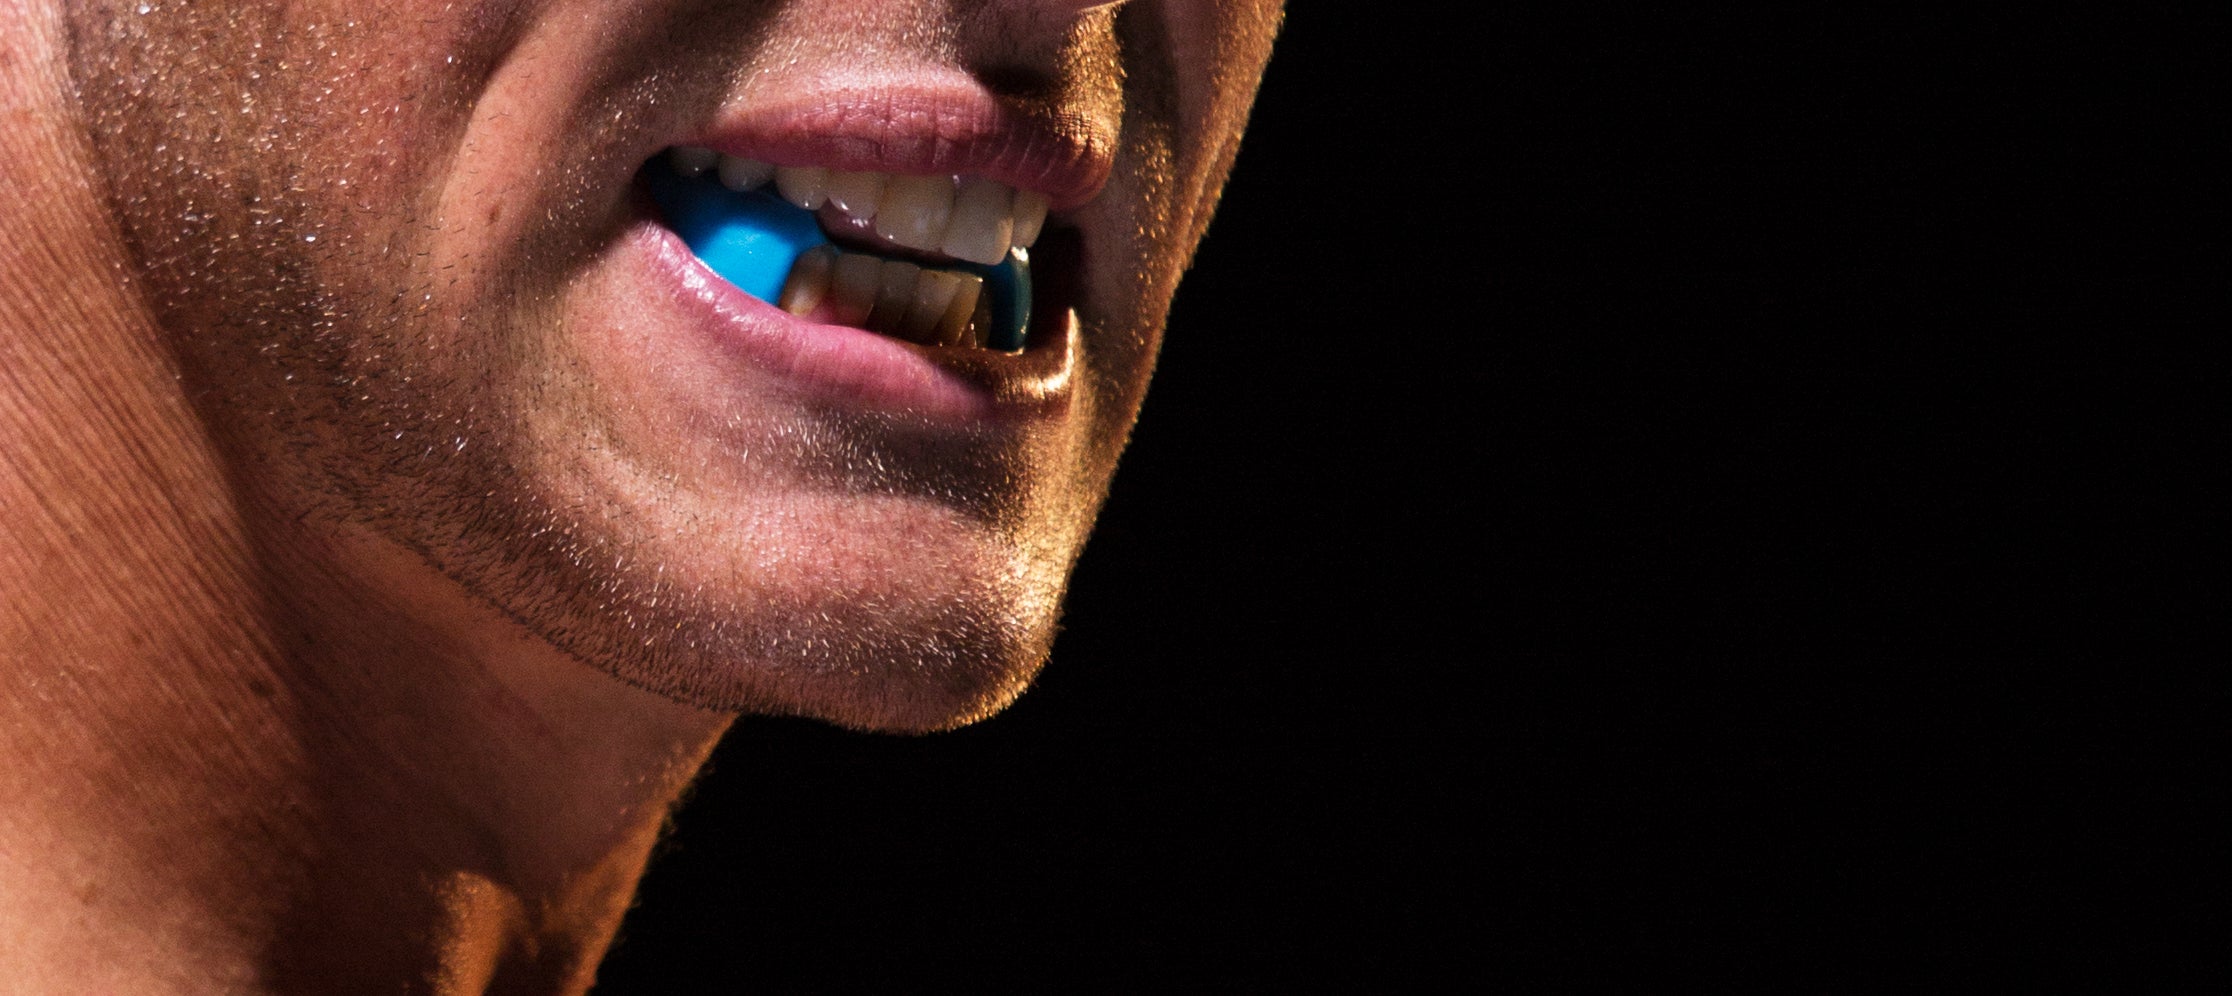 ARC Lower Performance mouthguard in blue shown on athlete's teeth closeup